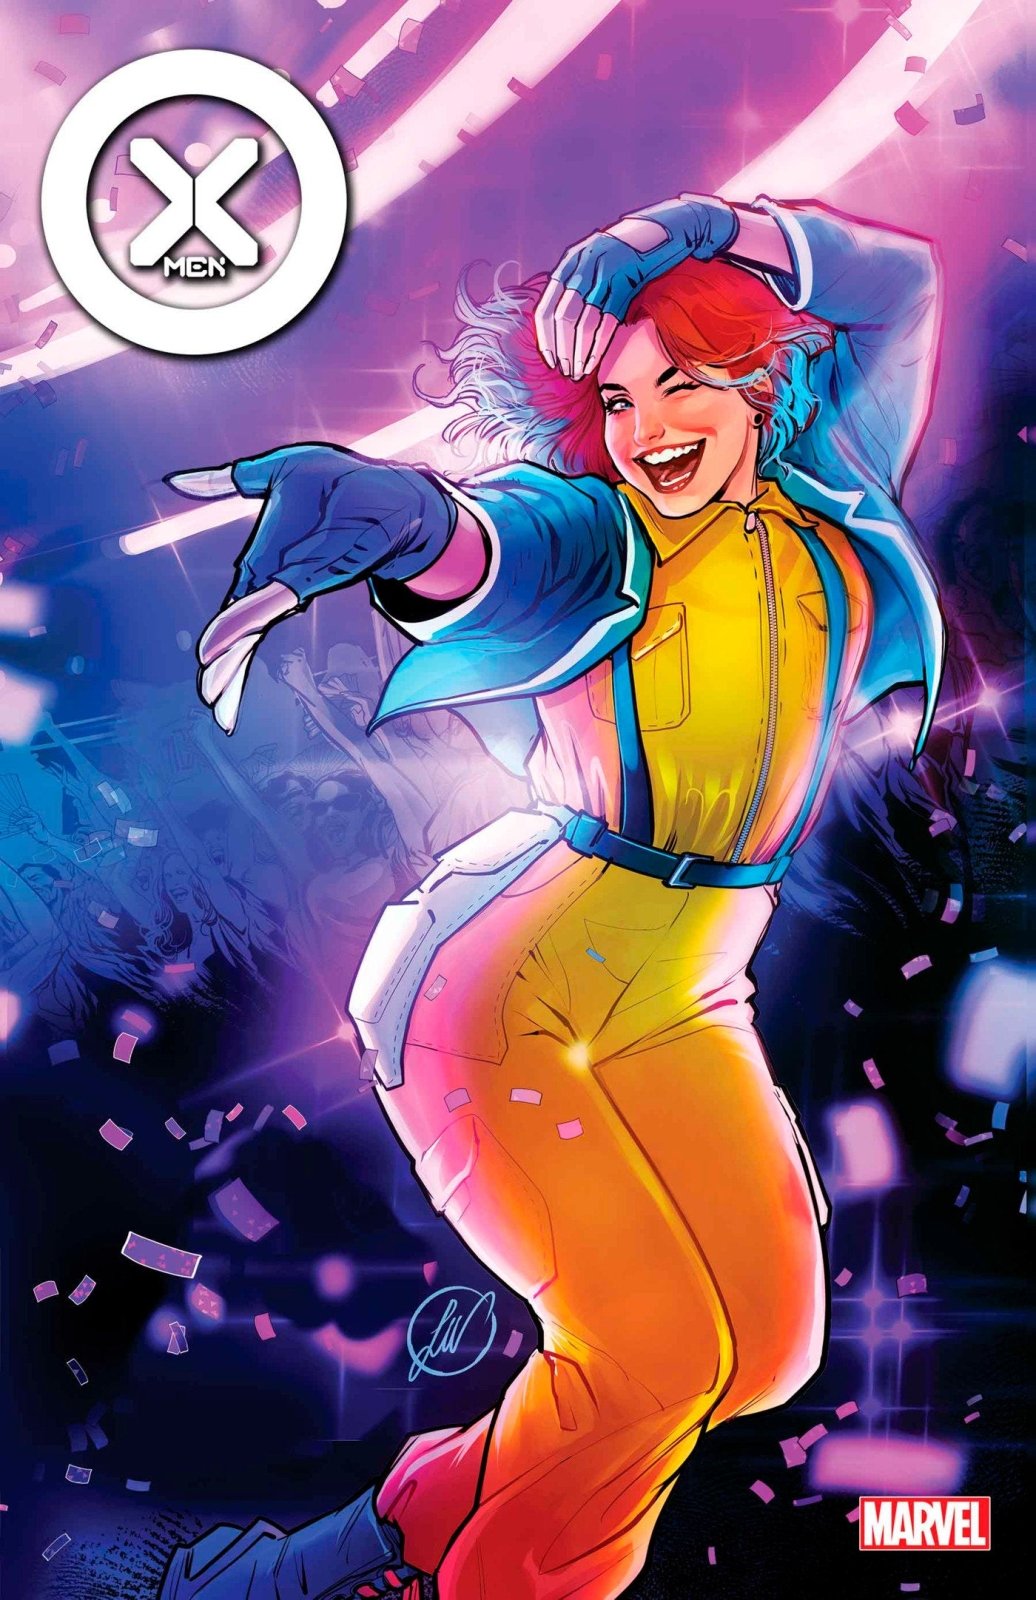 X-Men 23 Lucas Werneck Pride Variant - The Fourth Place